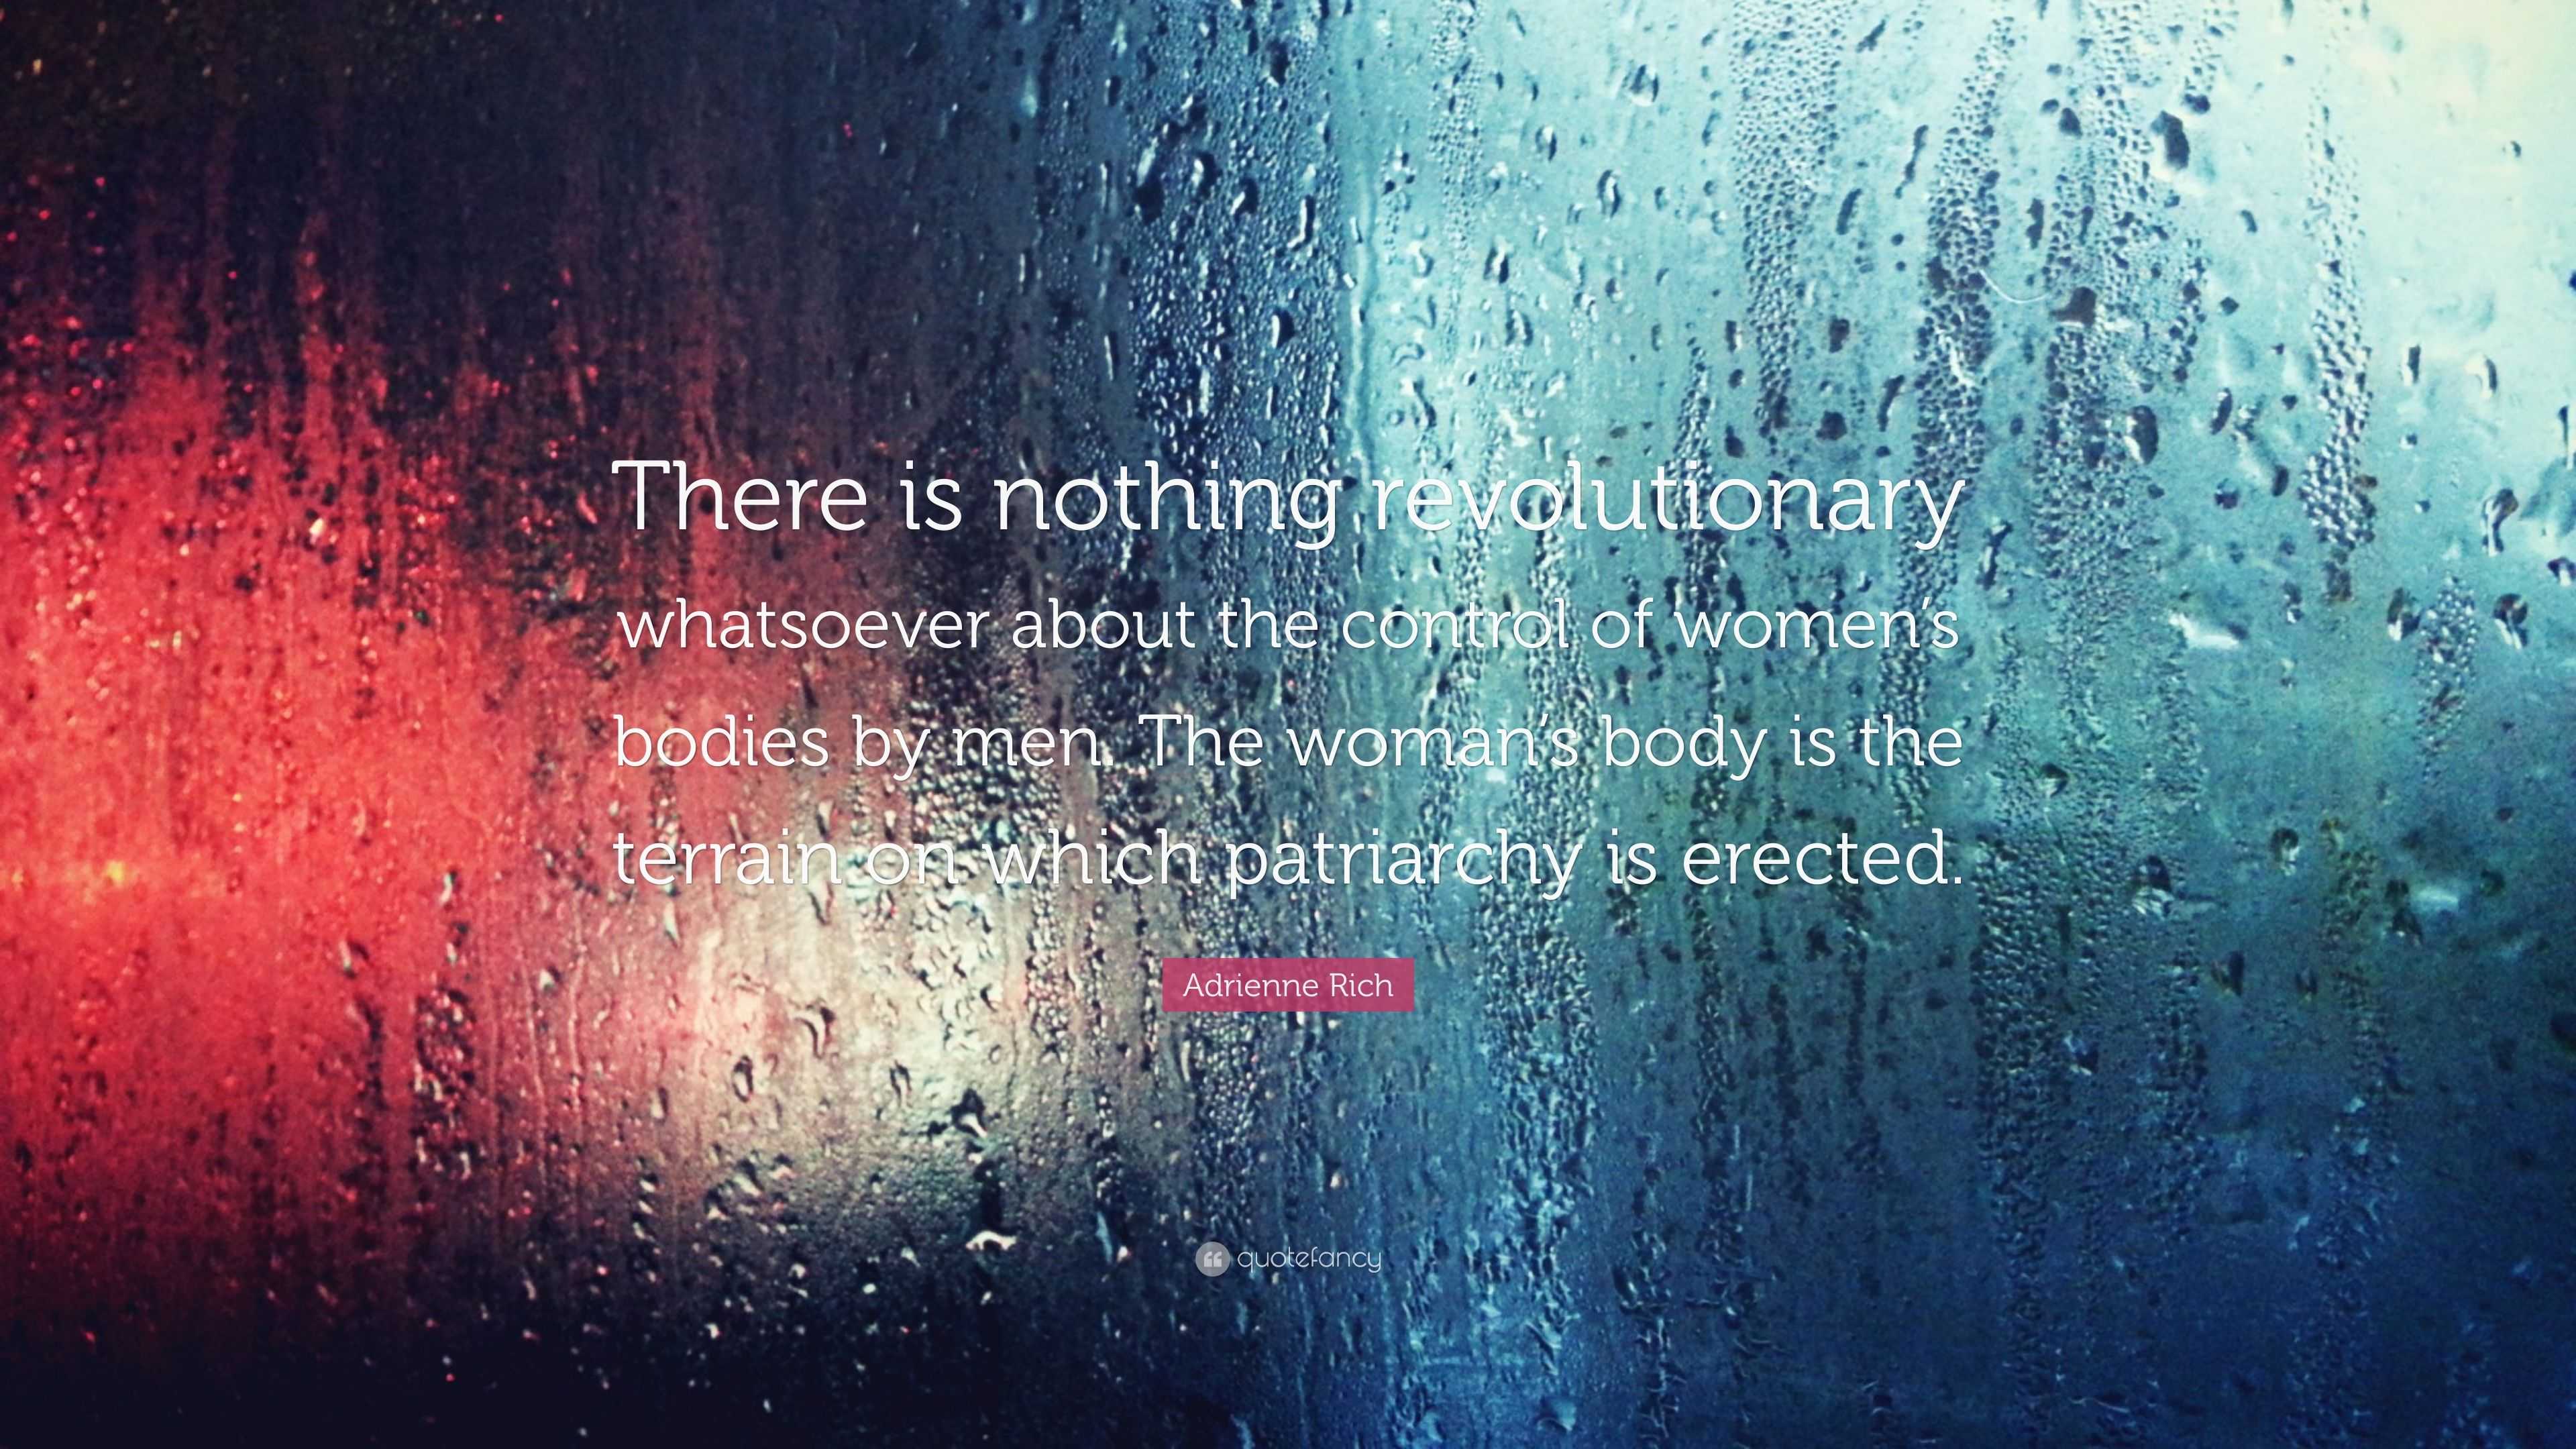 Adrienne Rich Quote: “There is nothing revolutionary whatsoever about the  control of women's bodies by men. The woman's body is the terrain on...”